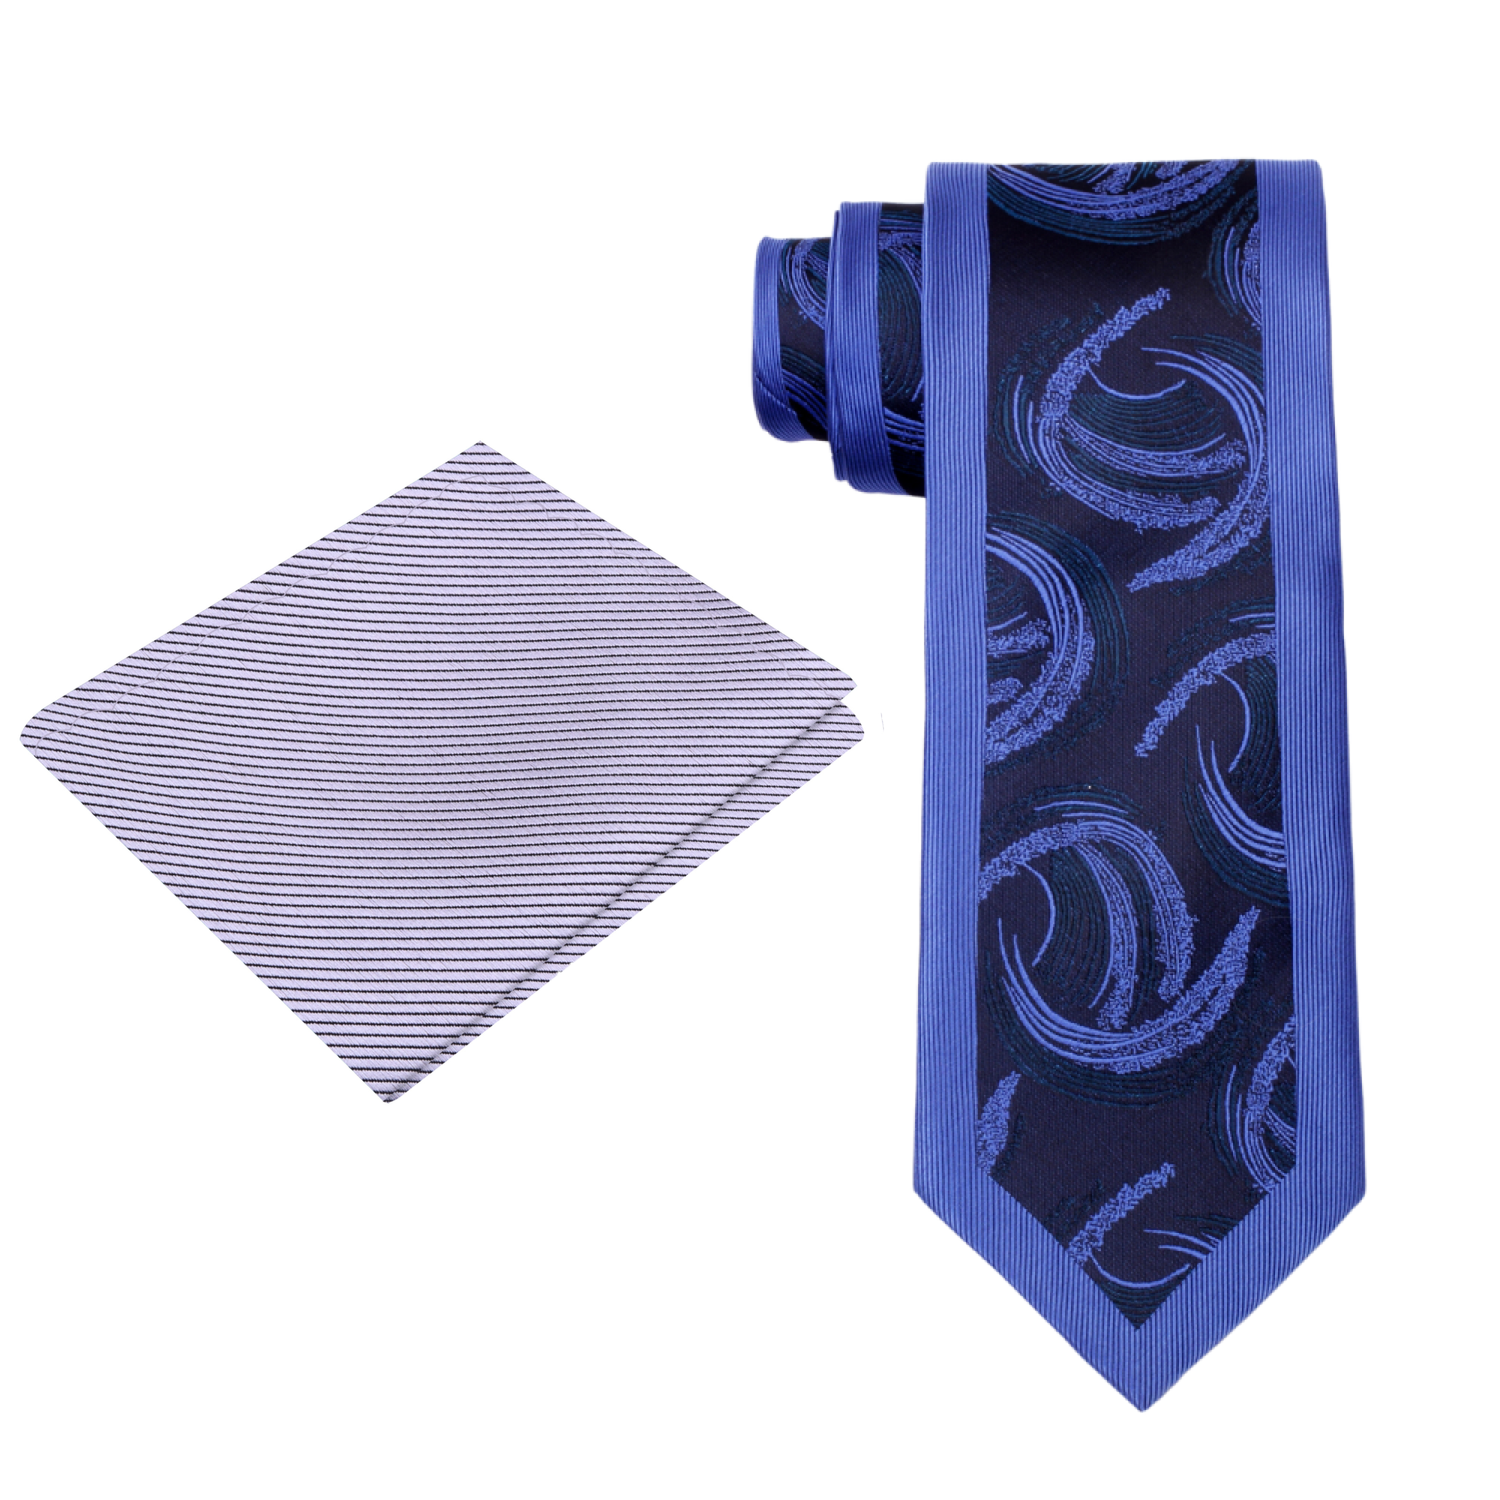 View 2L Blue Swirls Necktie and Silver Square